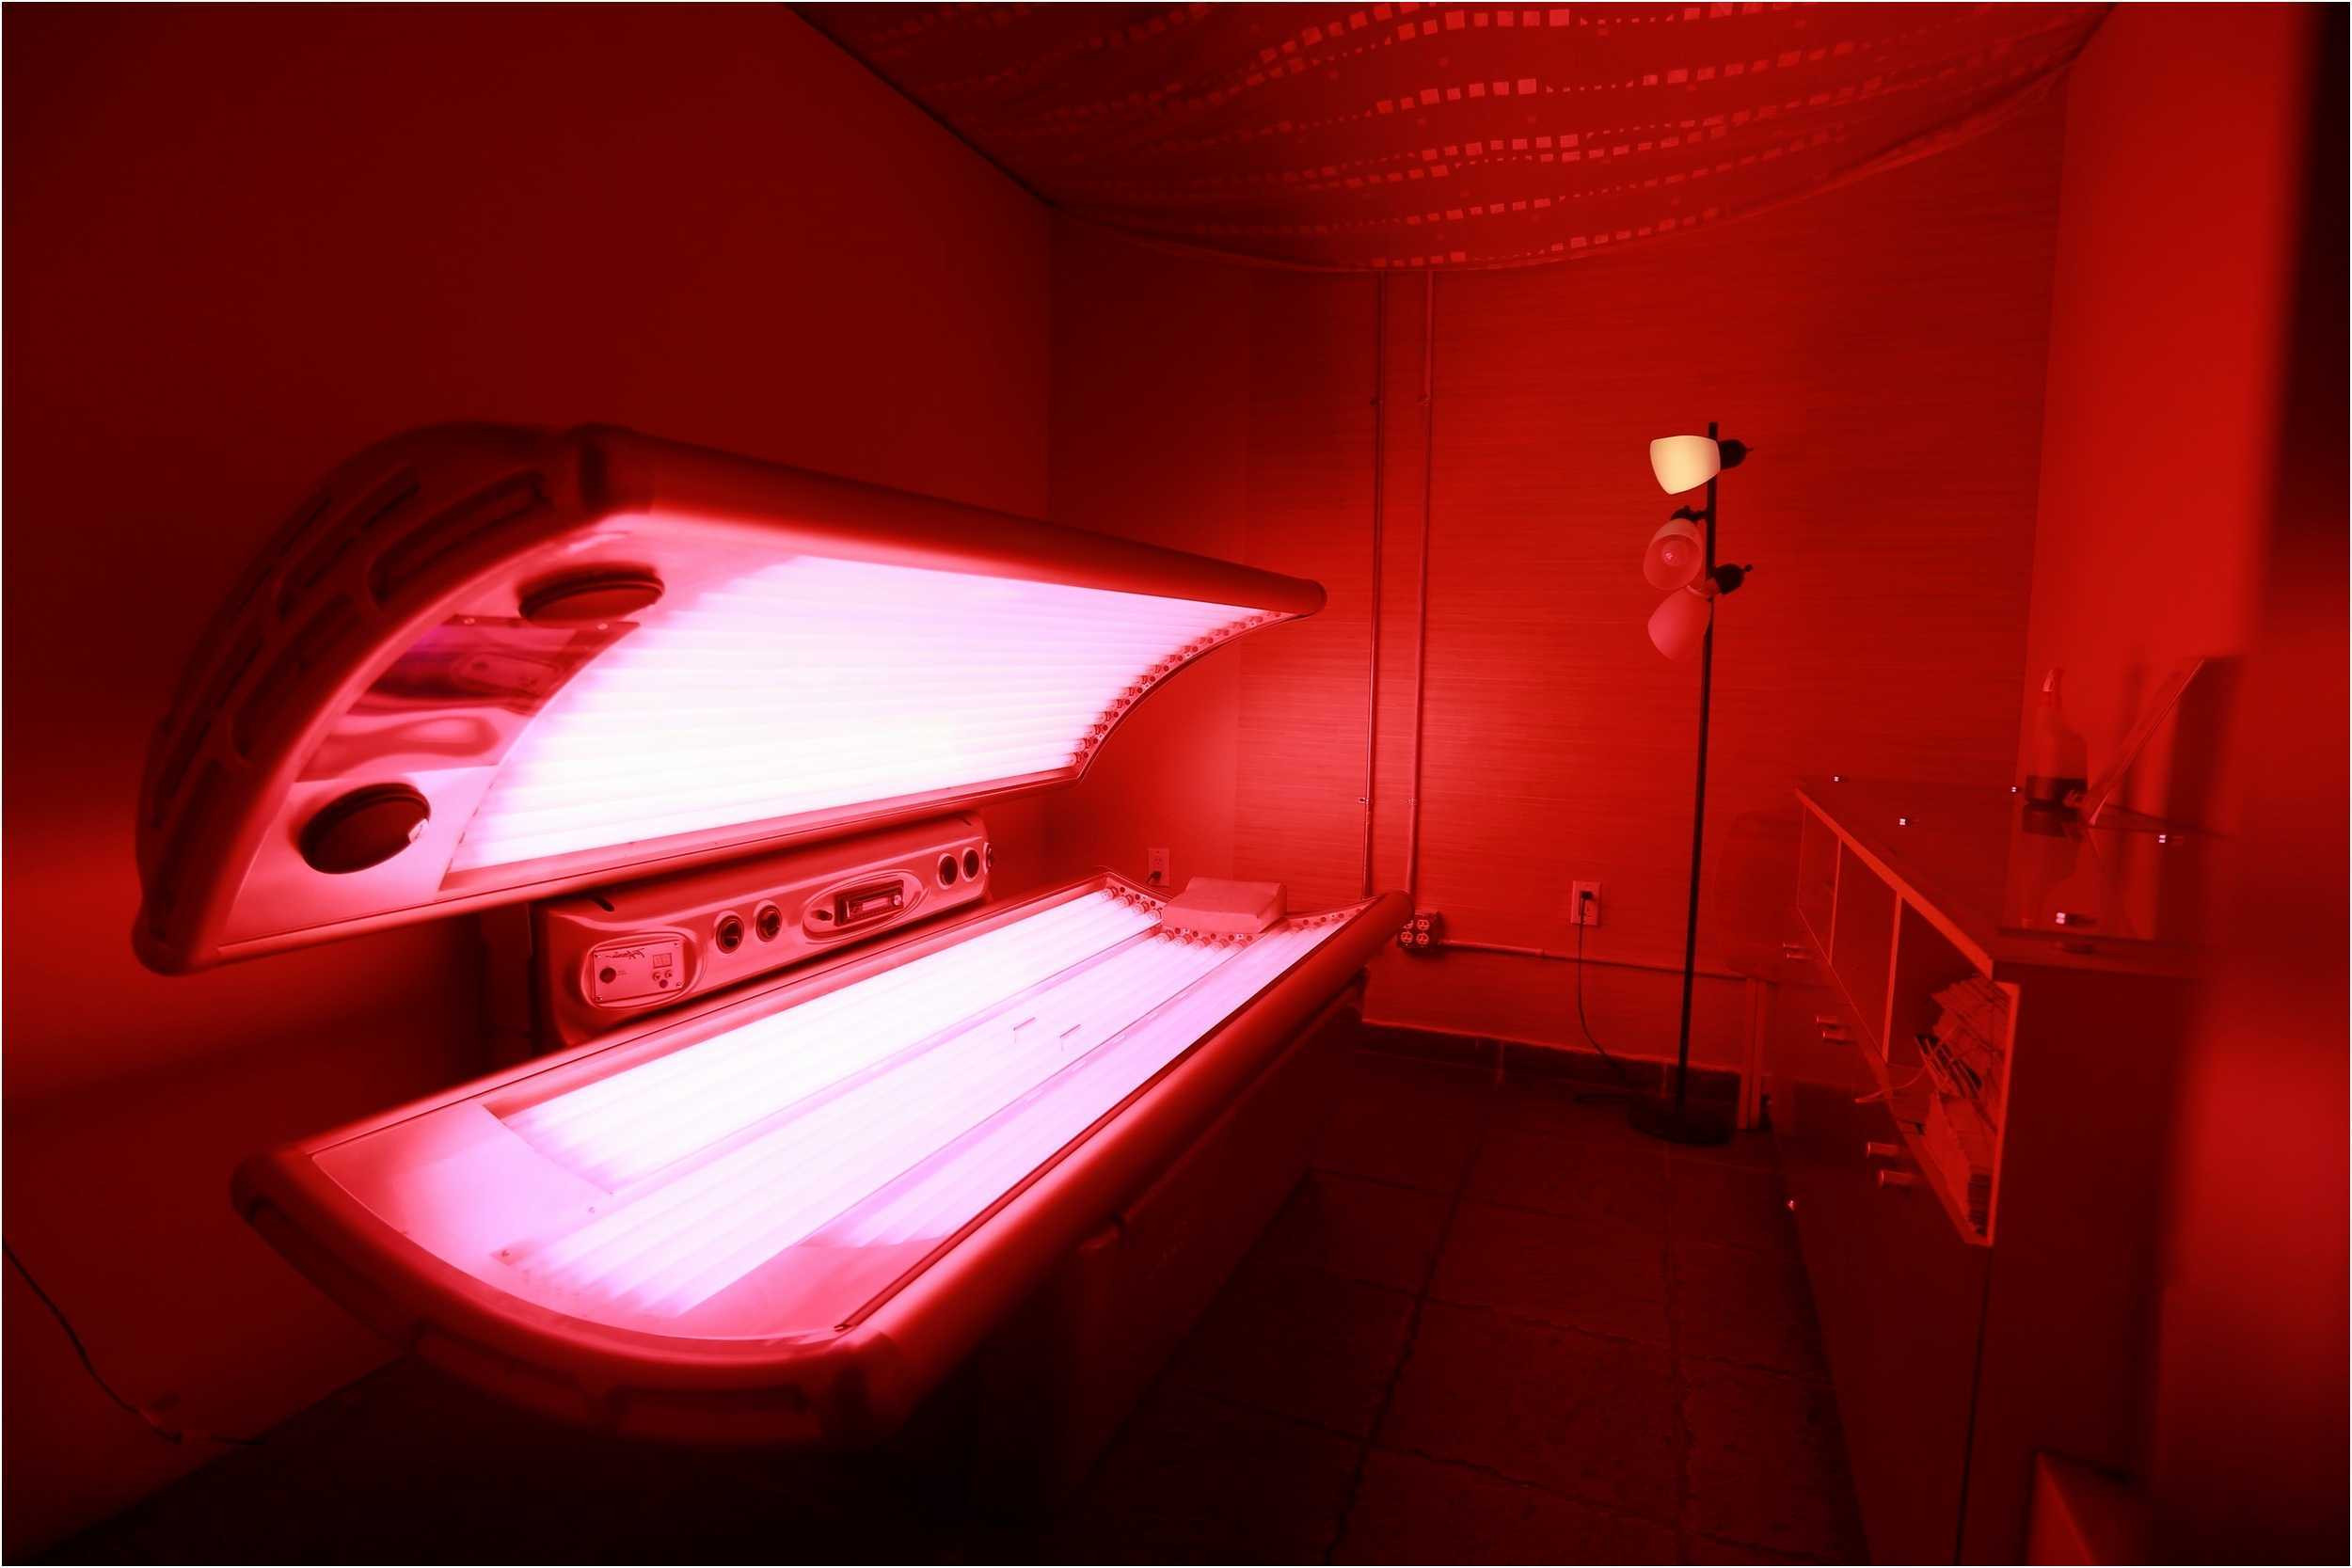 Red Light Bulb In Bedroom
 Red Light Bulbs For Tanning Bed • Bulbs Ideas